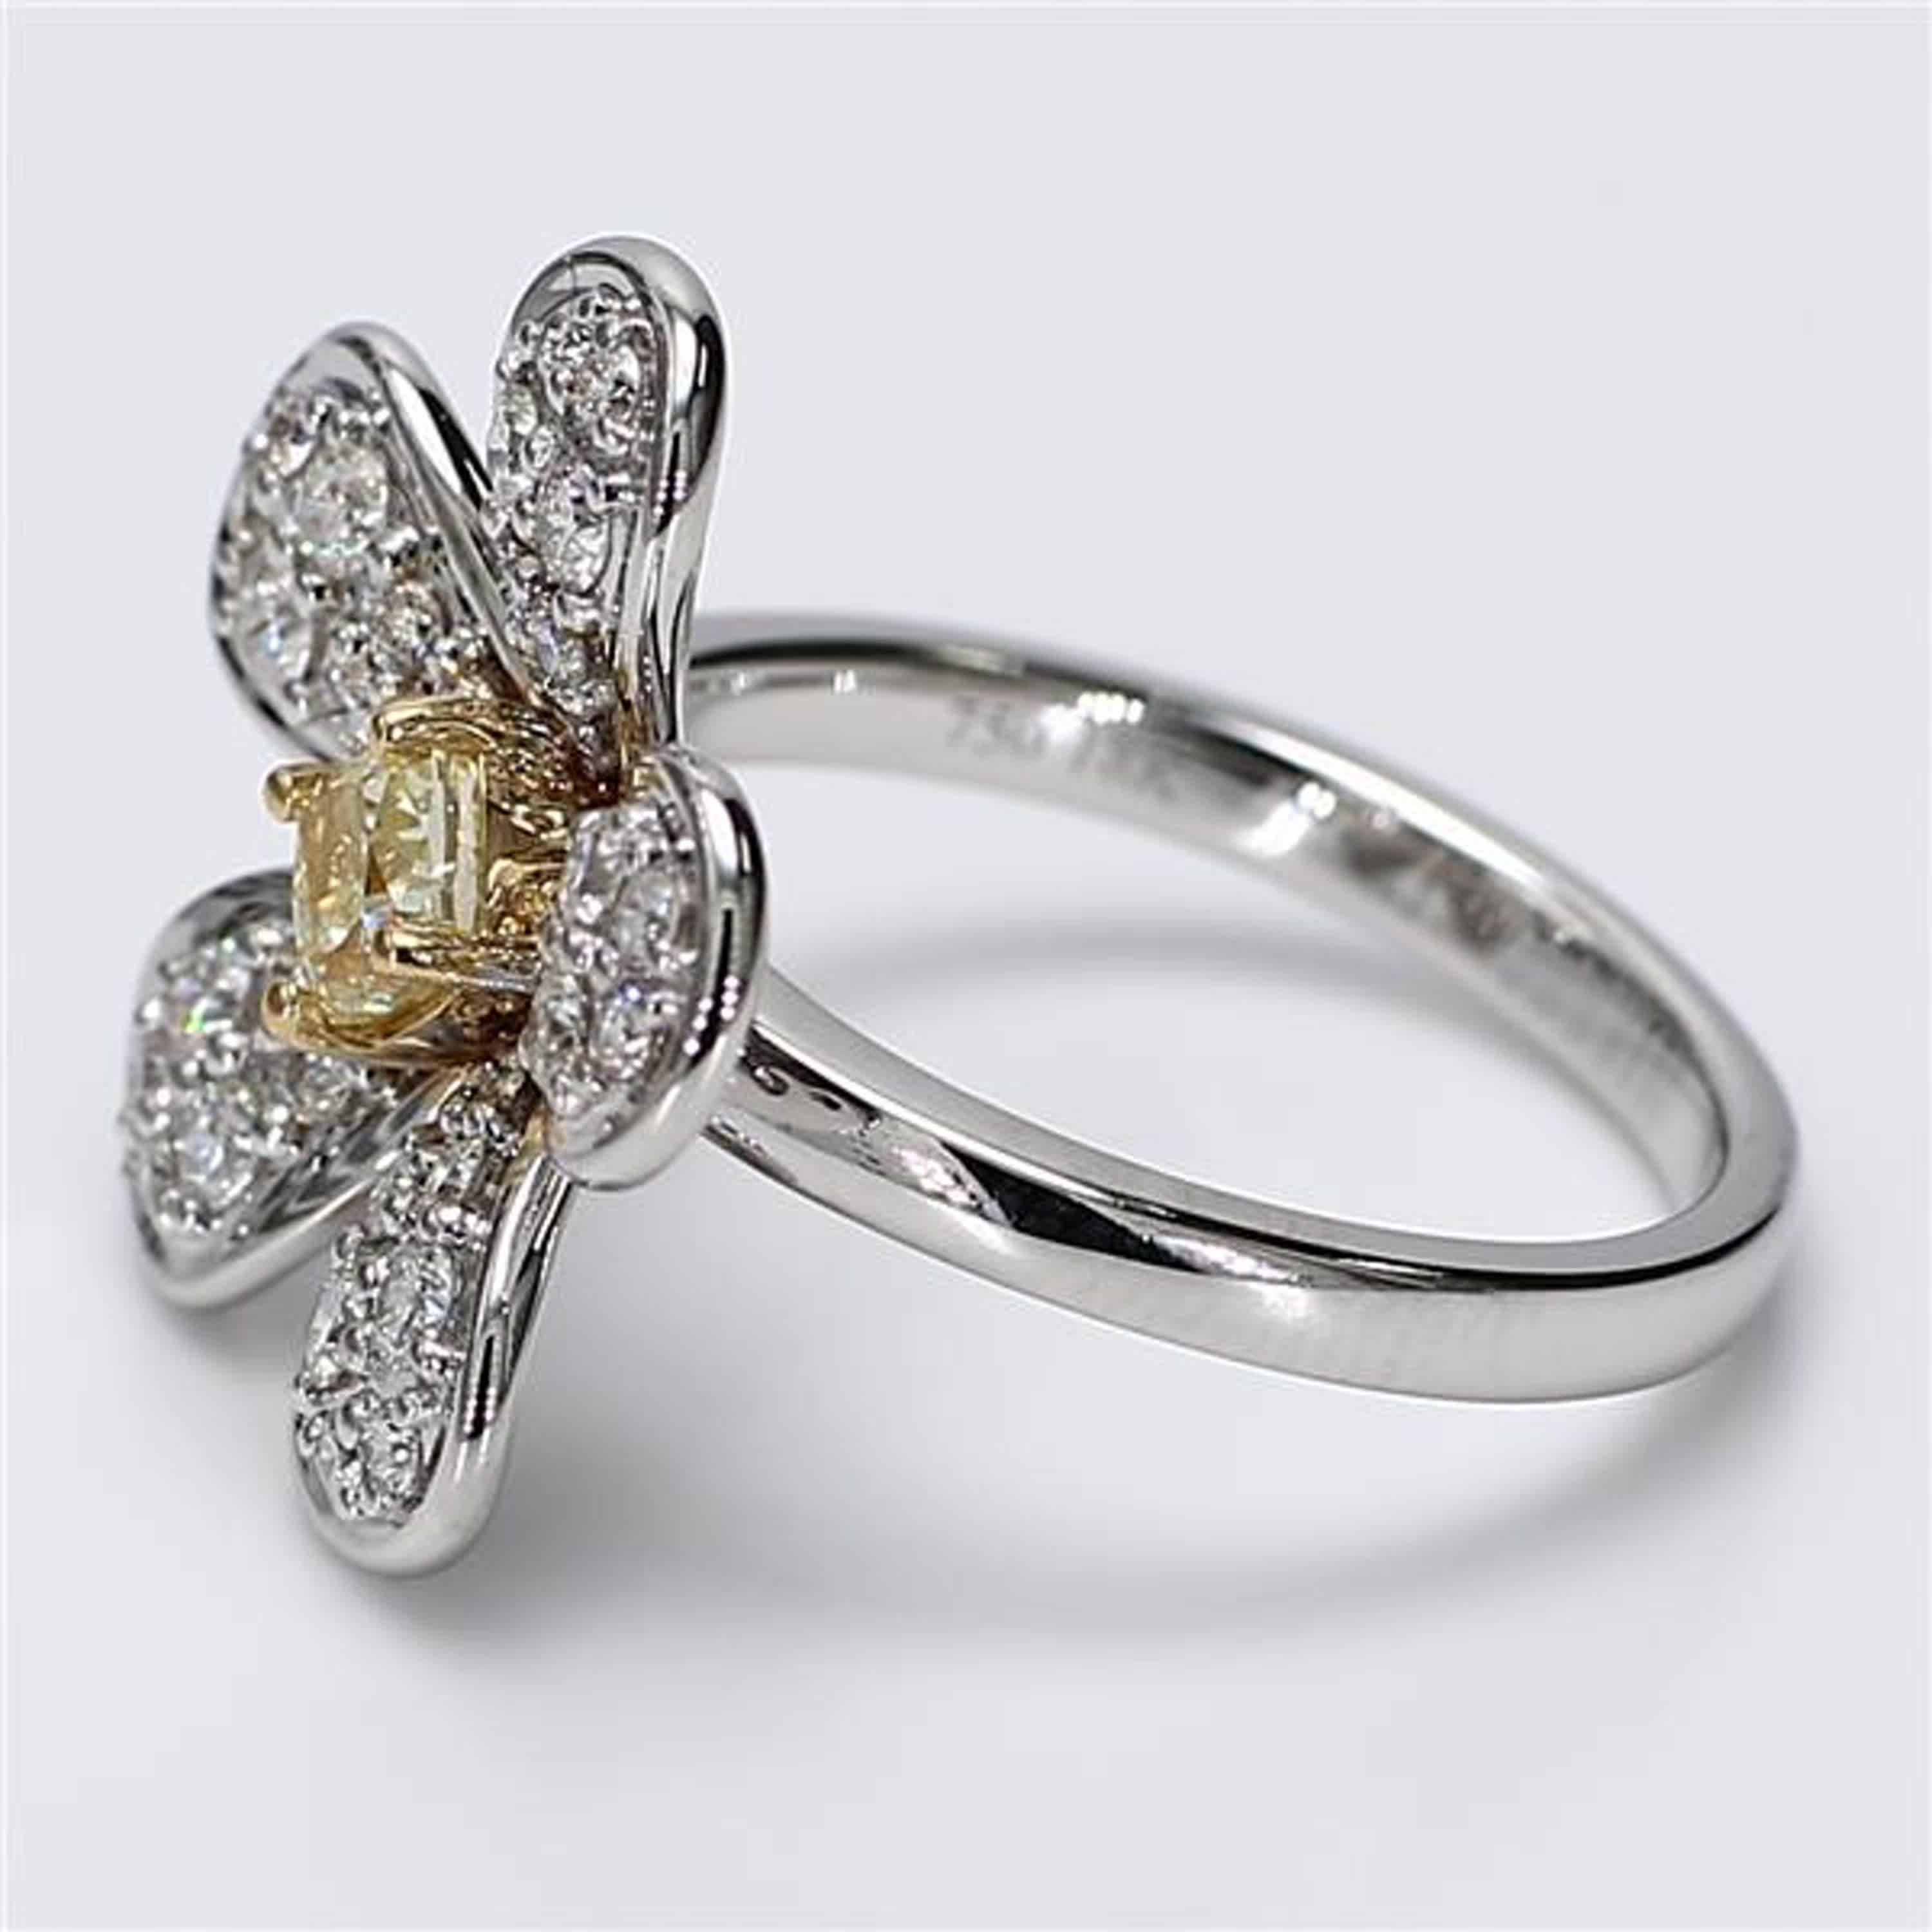 Contemporary Natural Yellow Cushion and White Diamond 1.01 Carat TW Gold Cocktail Ring